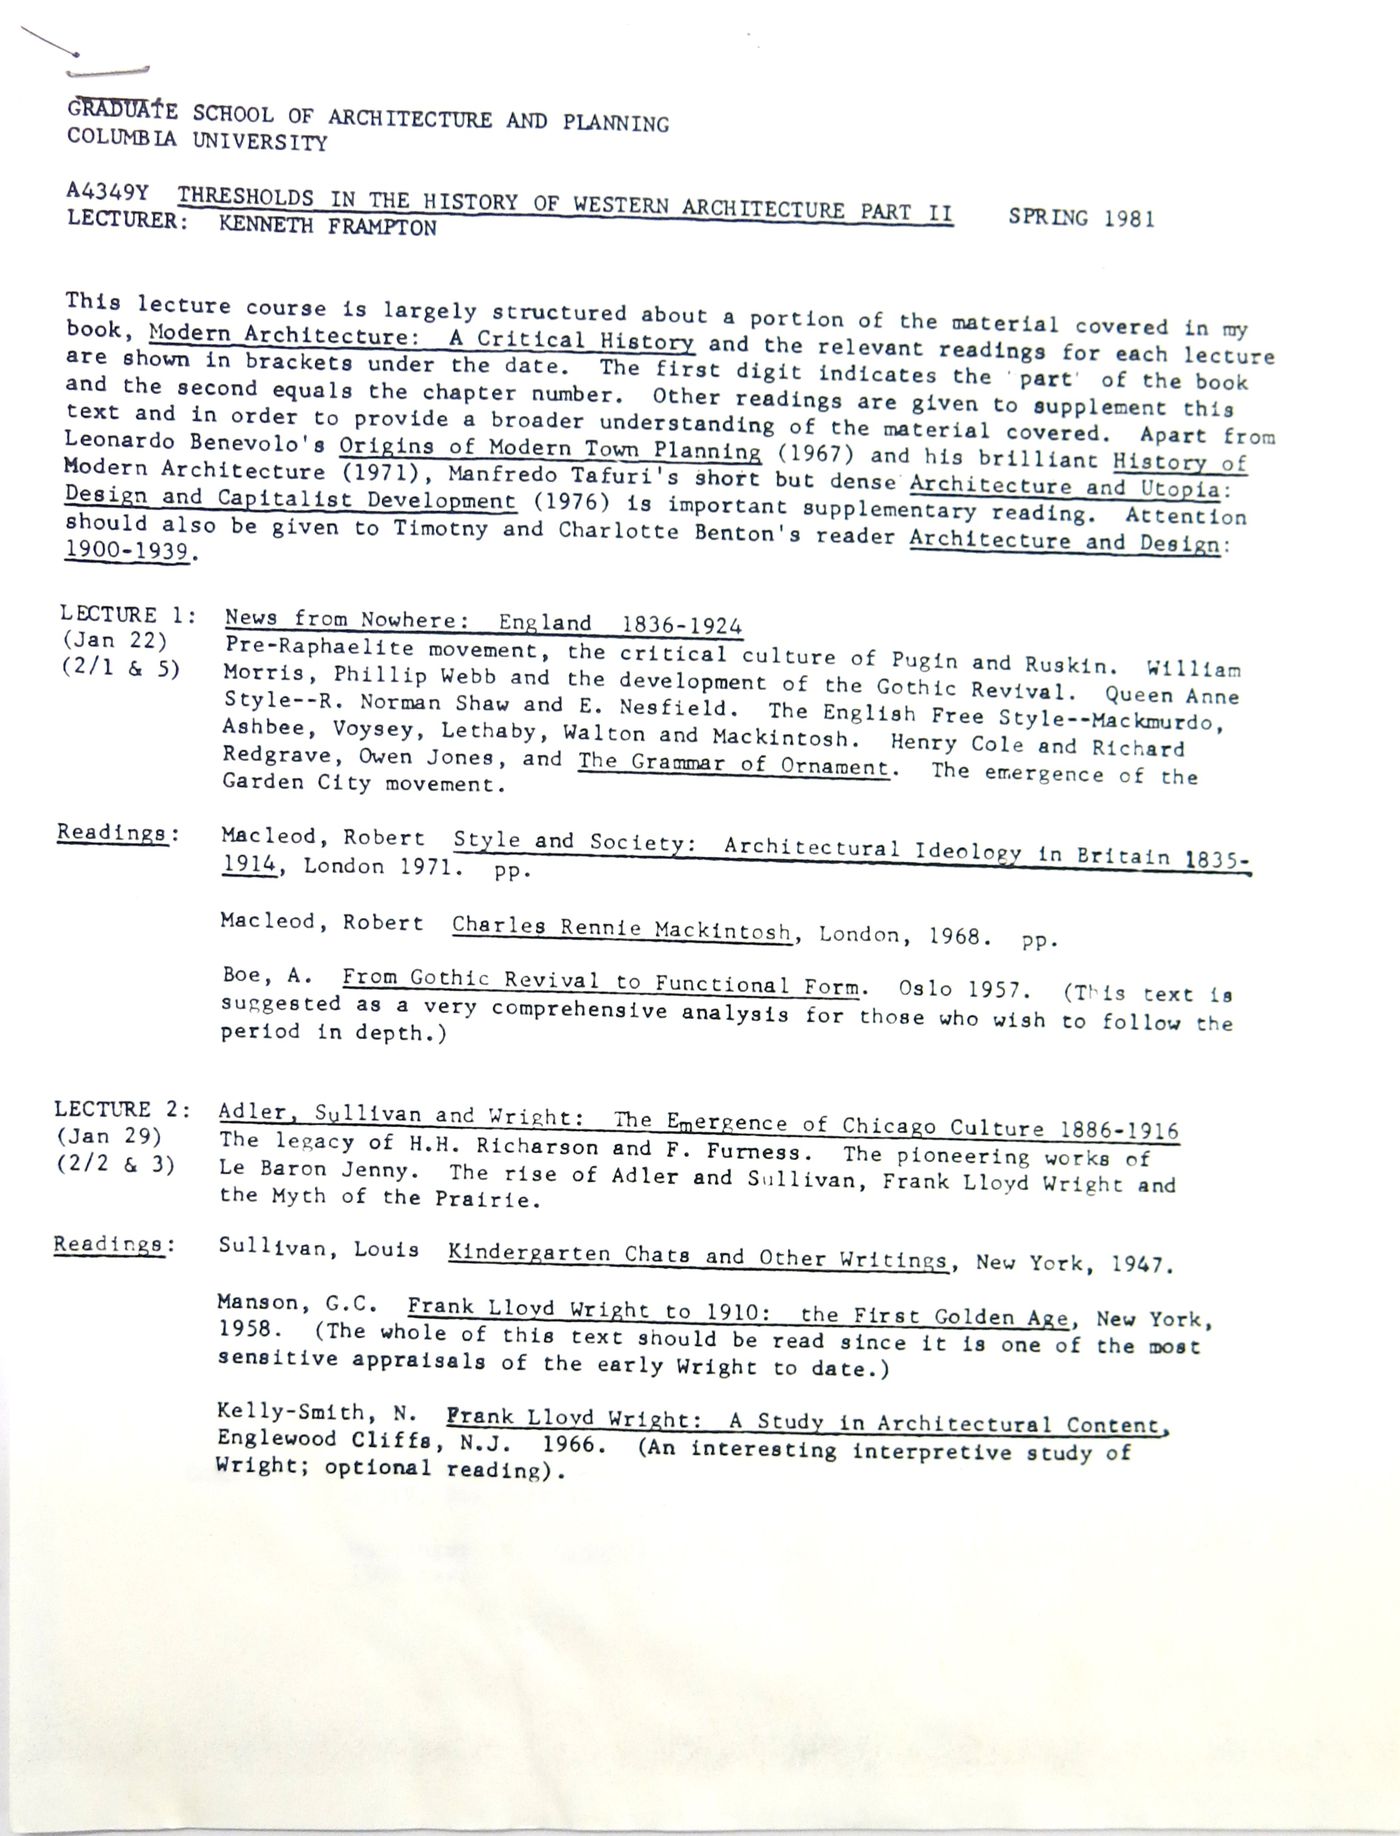 Syllabus of  the A4349Y Threshold in History of Western Architecture Part II at Columbia University's Graduate School of Architecture, Planning and Preservation